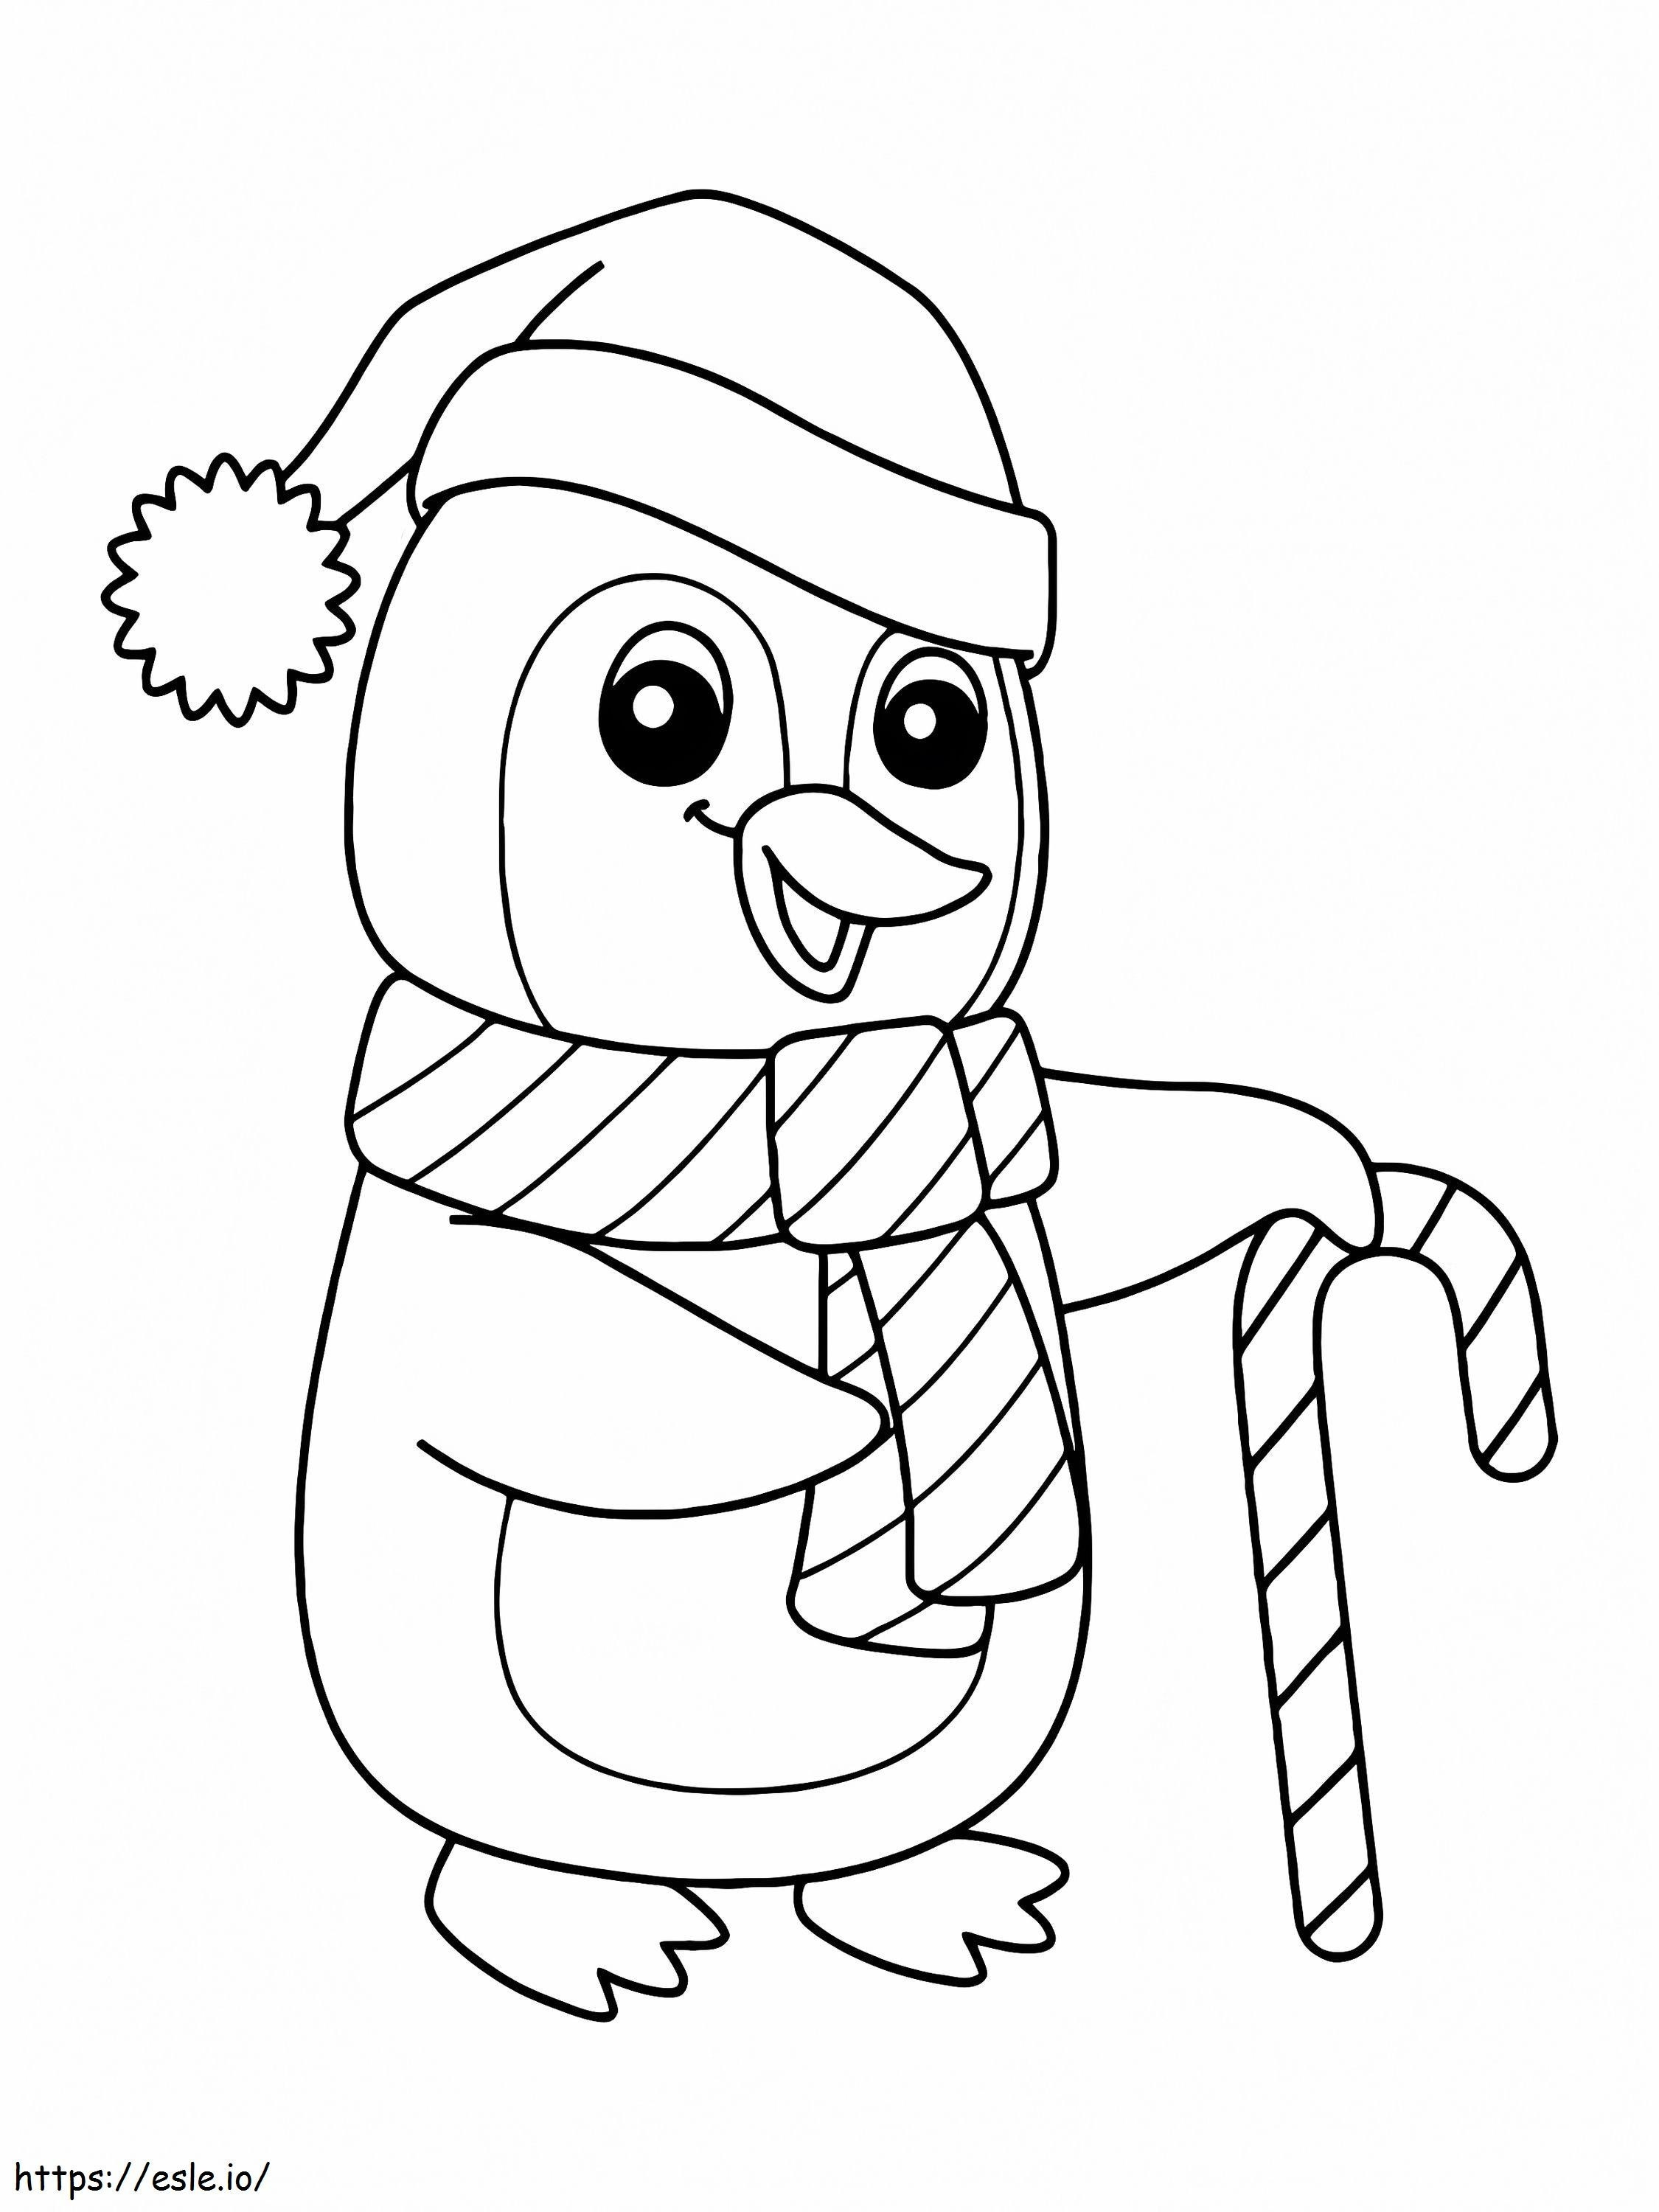 Christmas Penguin coloring page